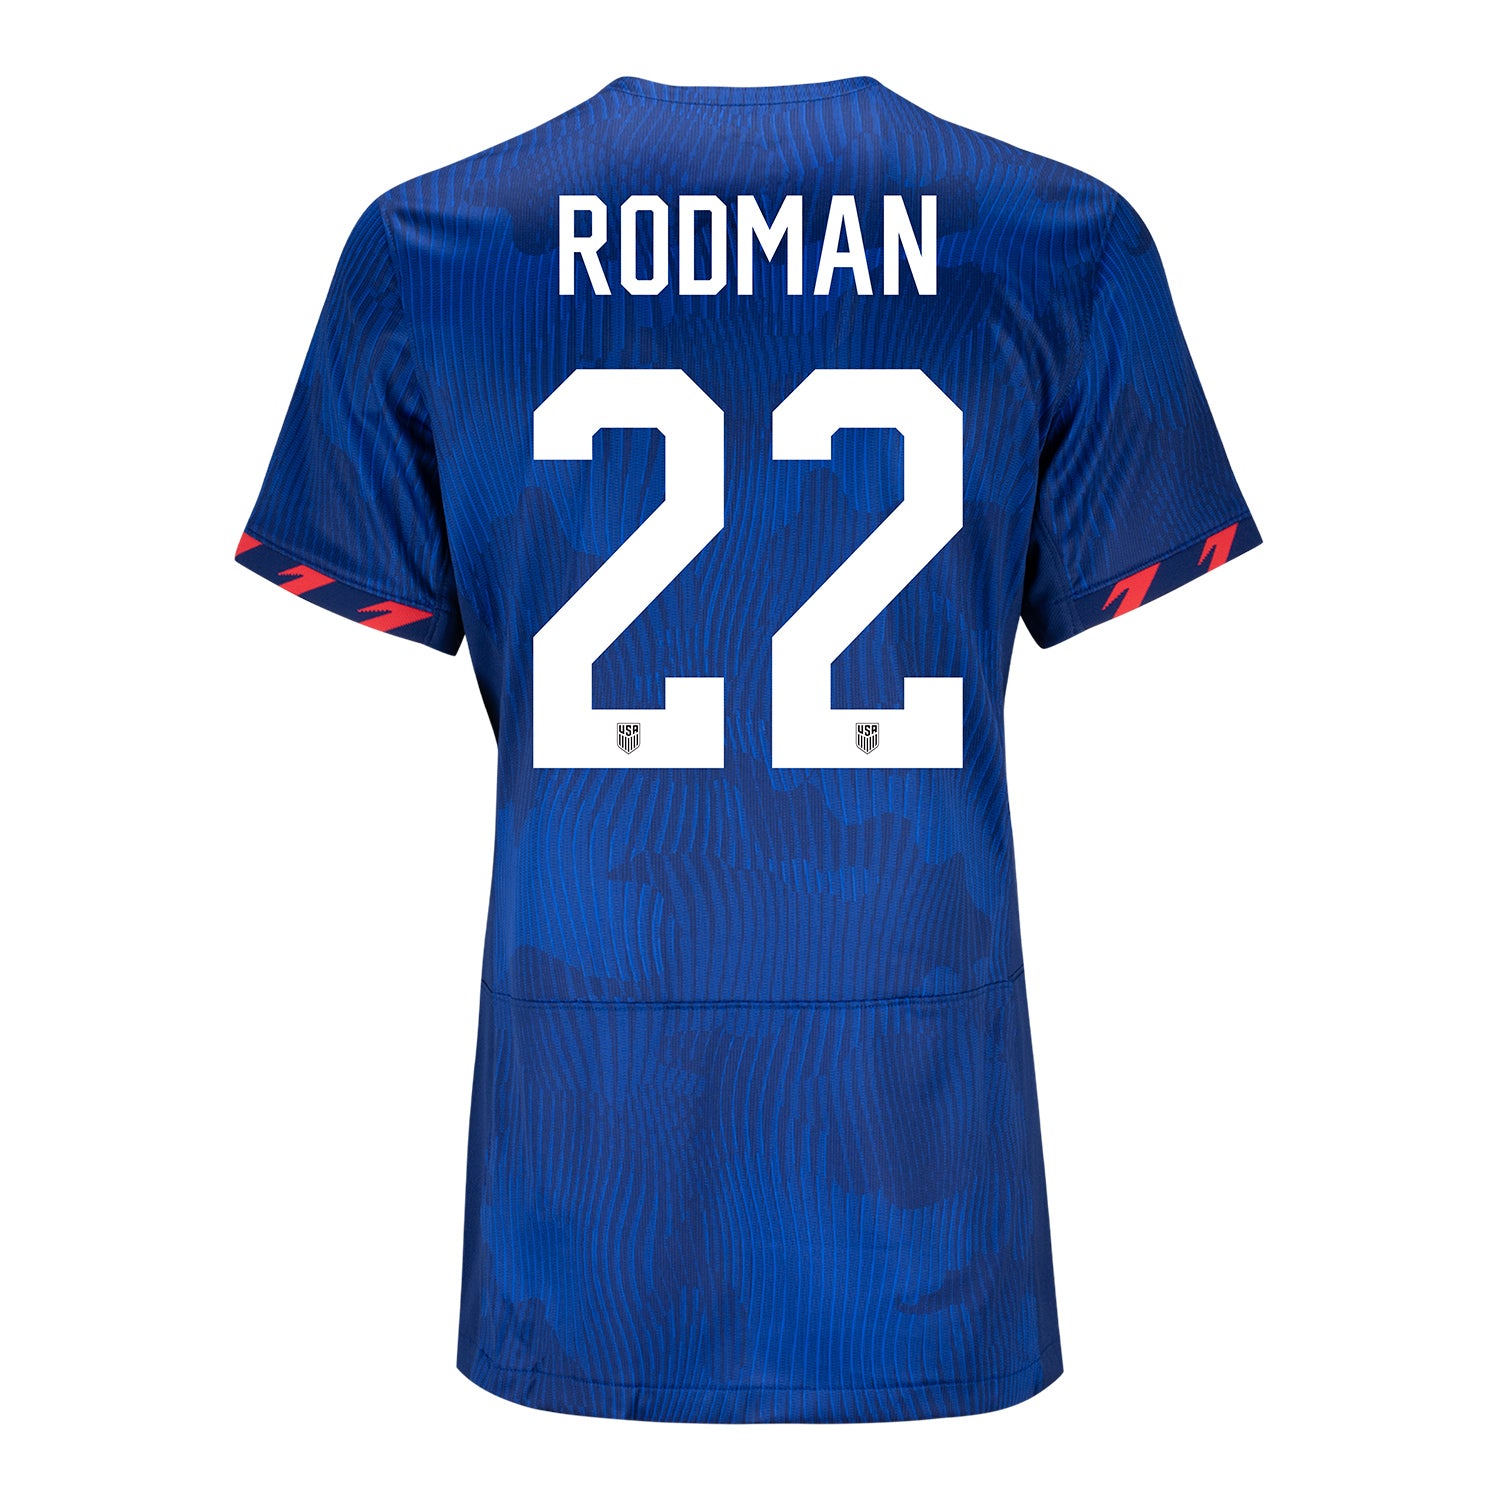 Women's Personalized Nike USWNT Away Stadium Jersey in Blue - Back View